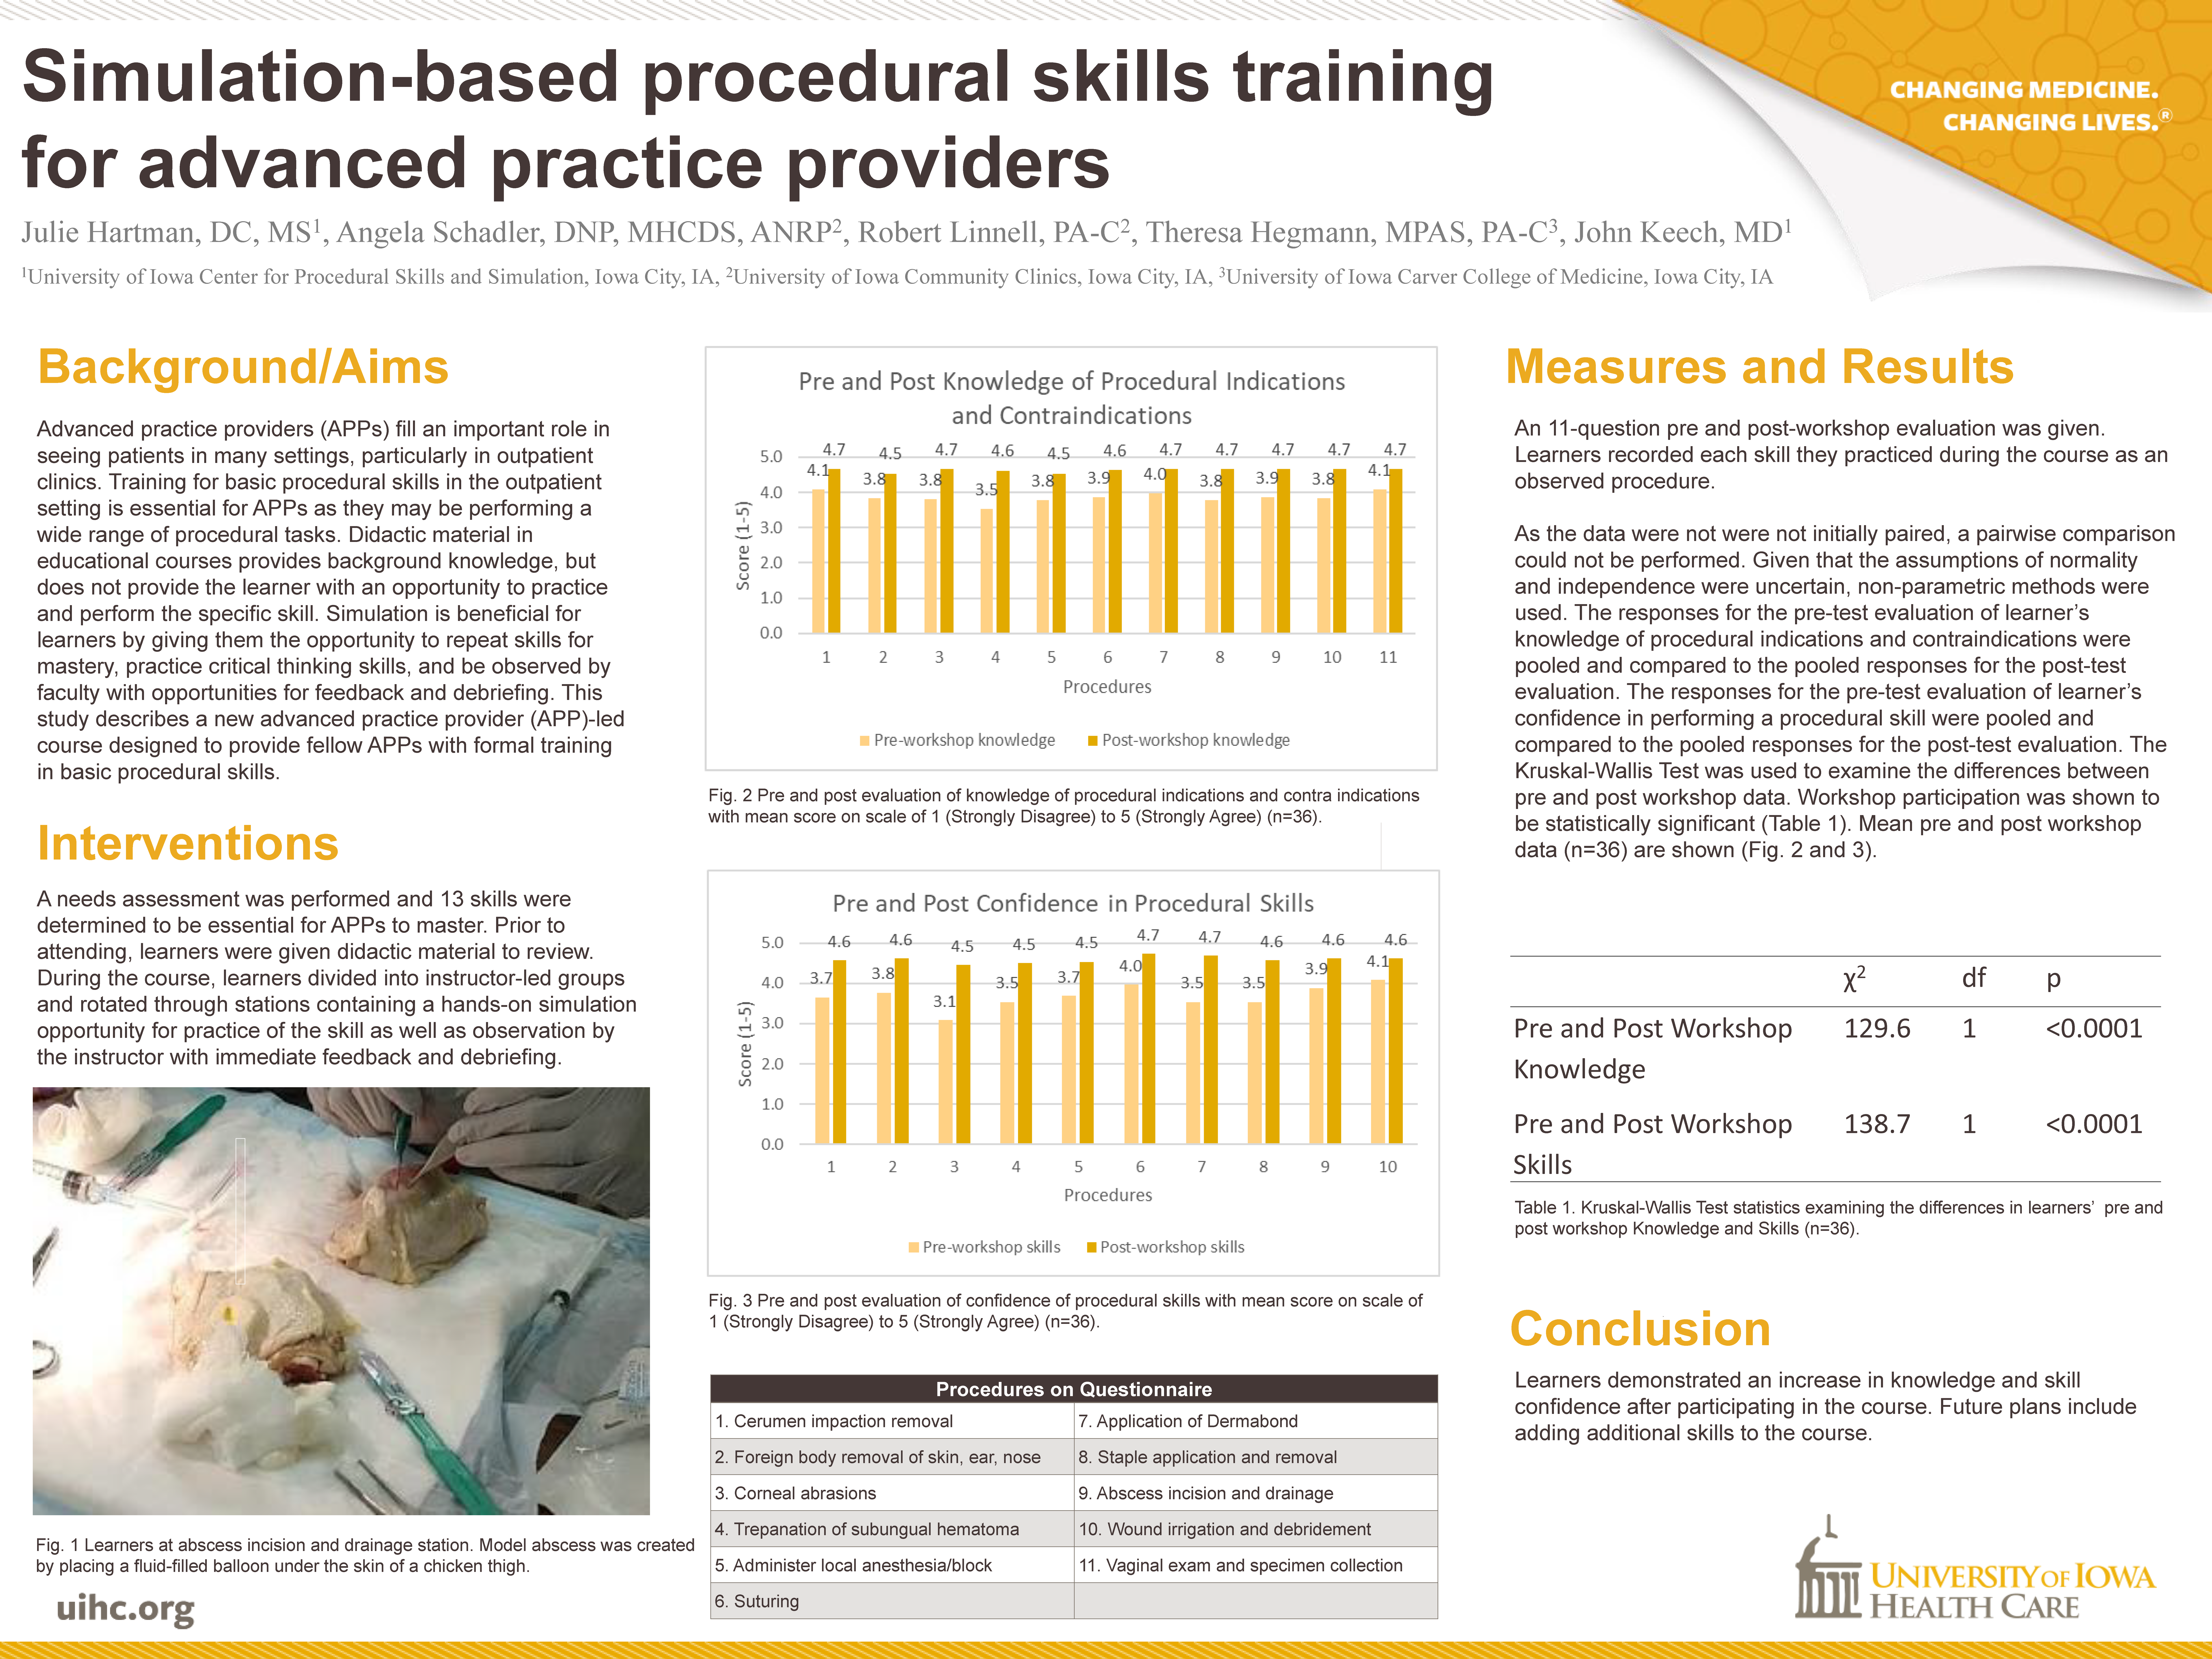 Simulation-based procedural skills training for advanced practice providers